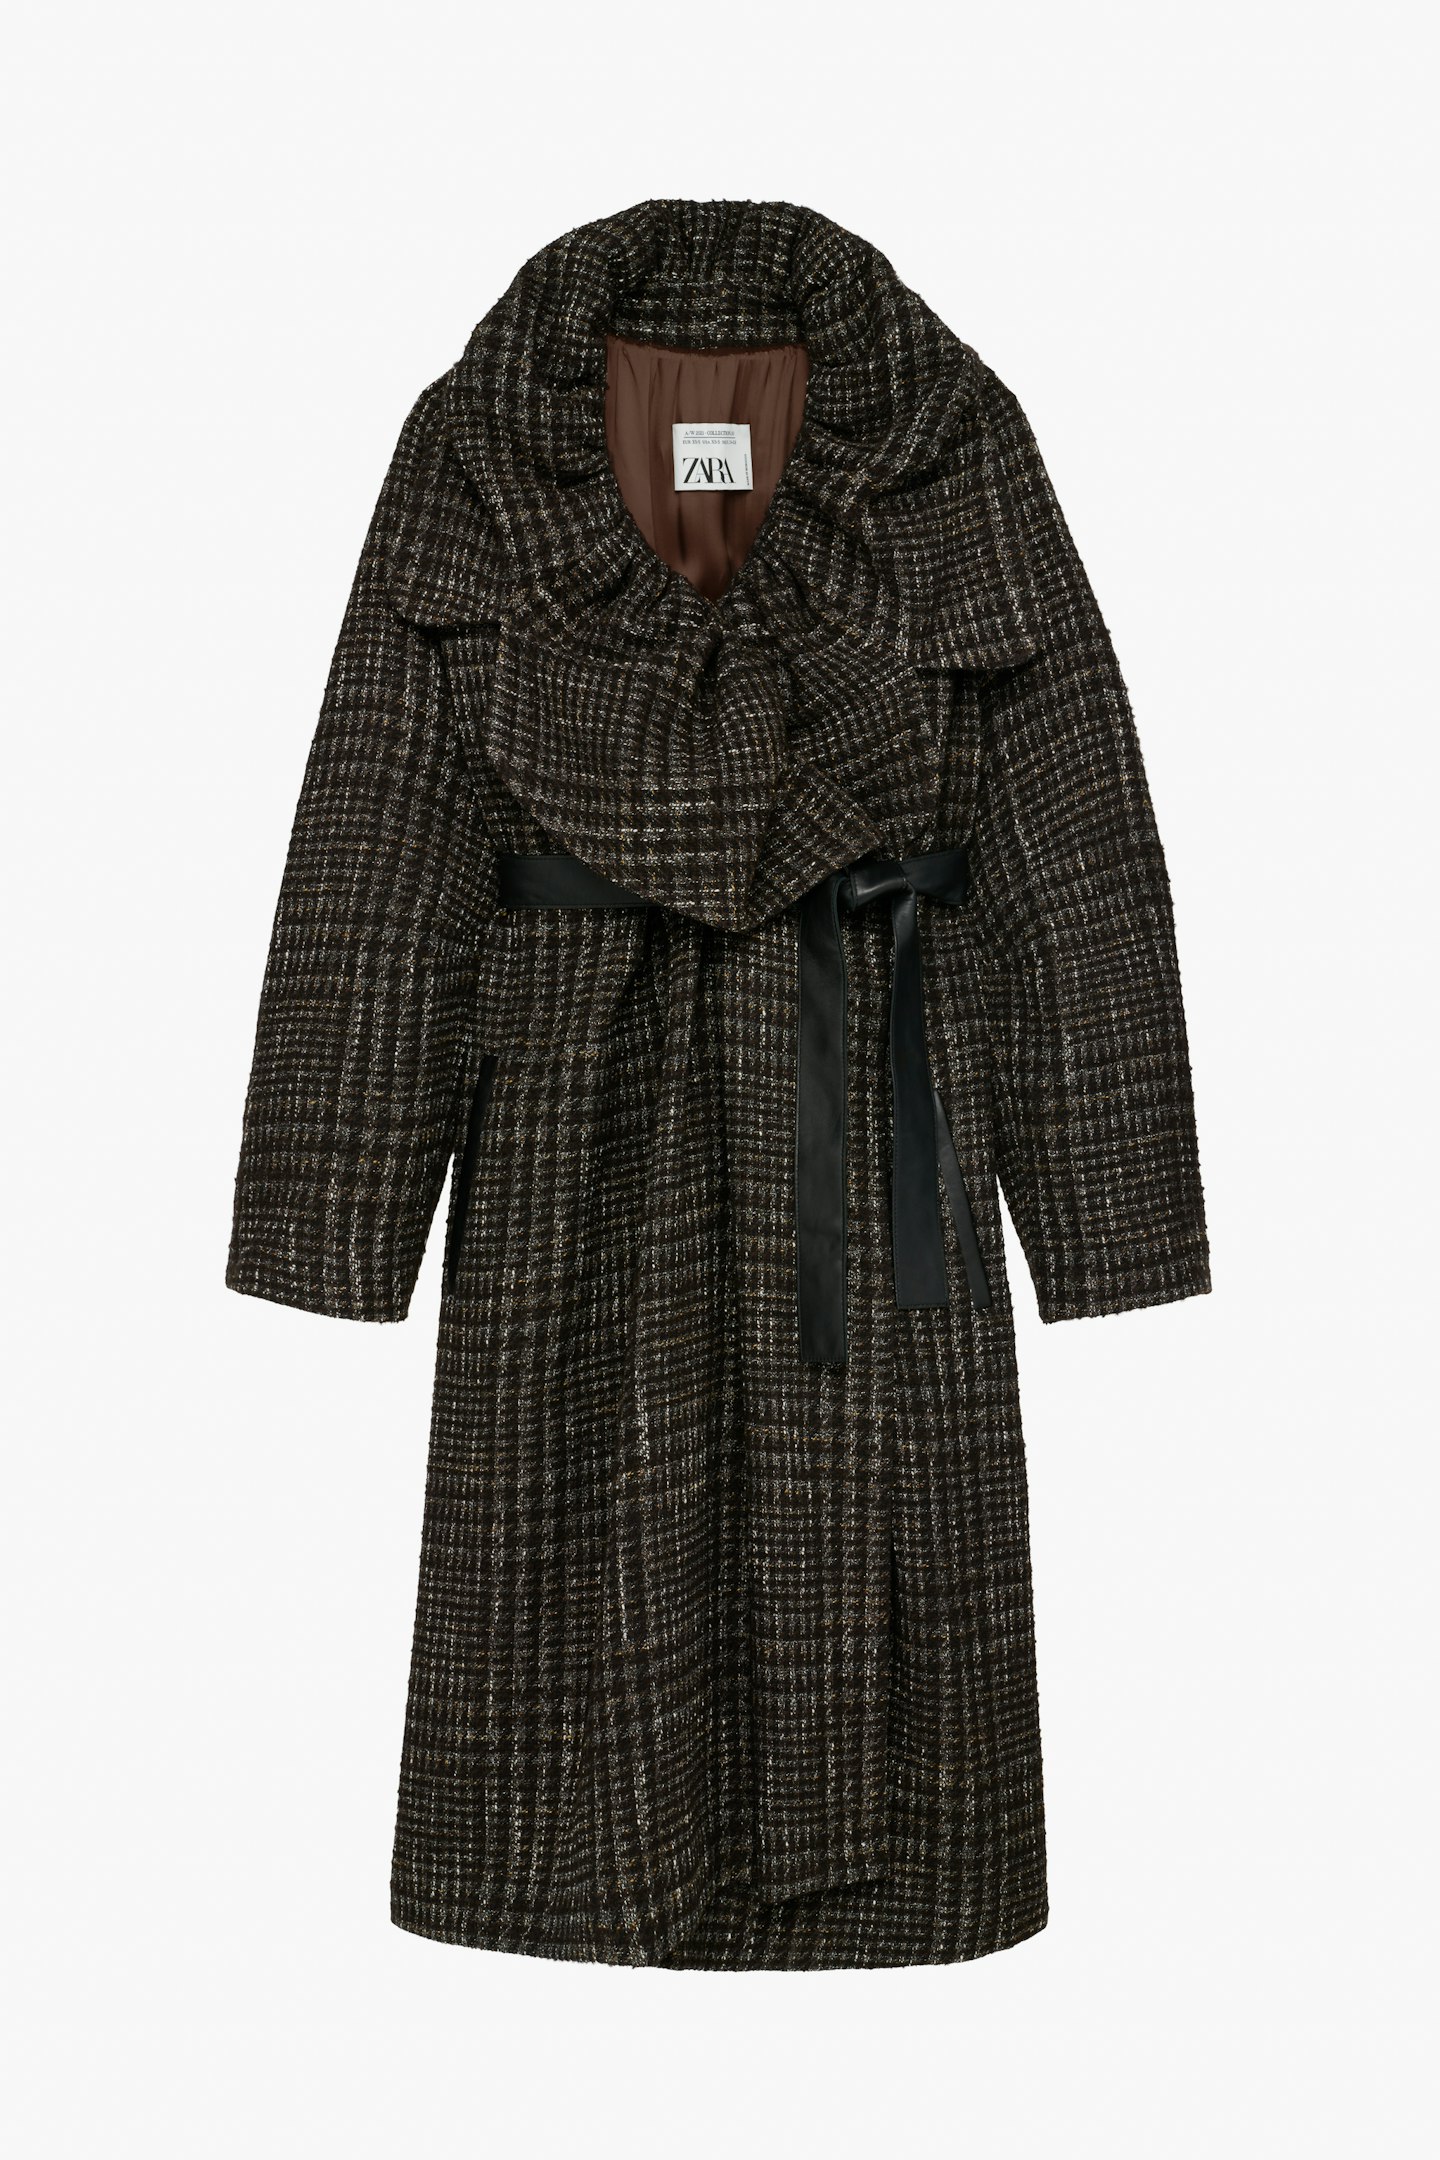 Limited Edition Puff Neck Coat, £179